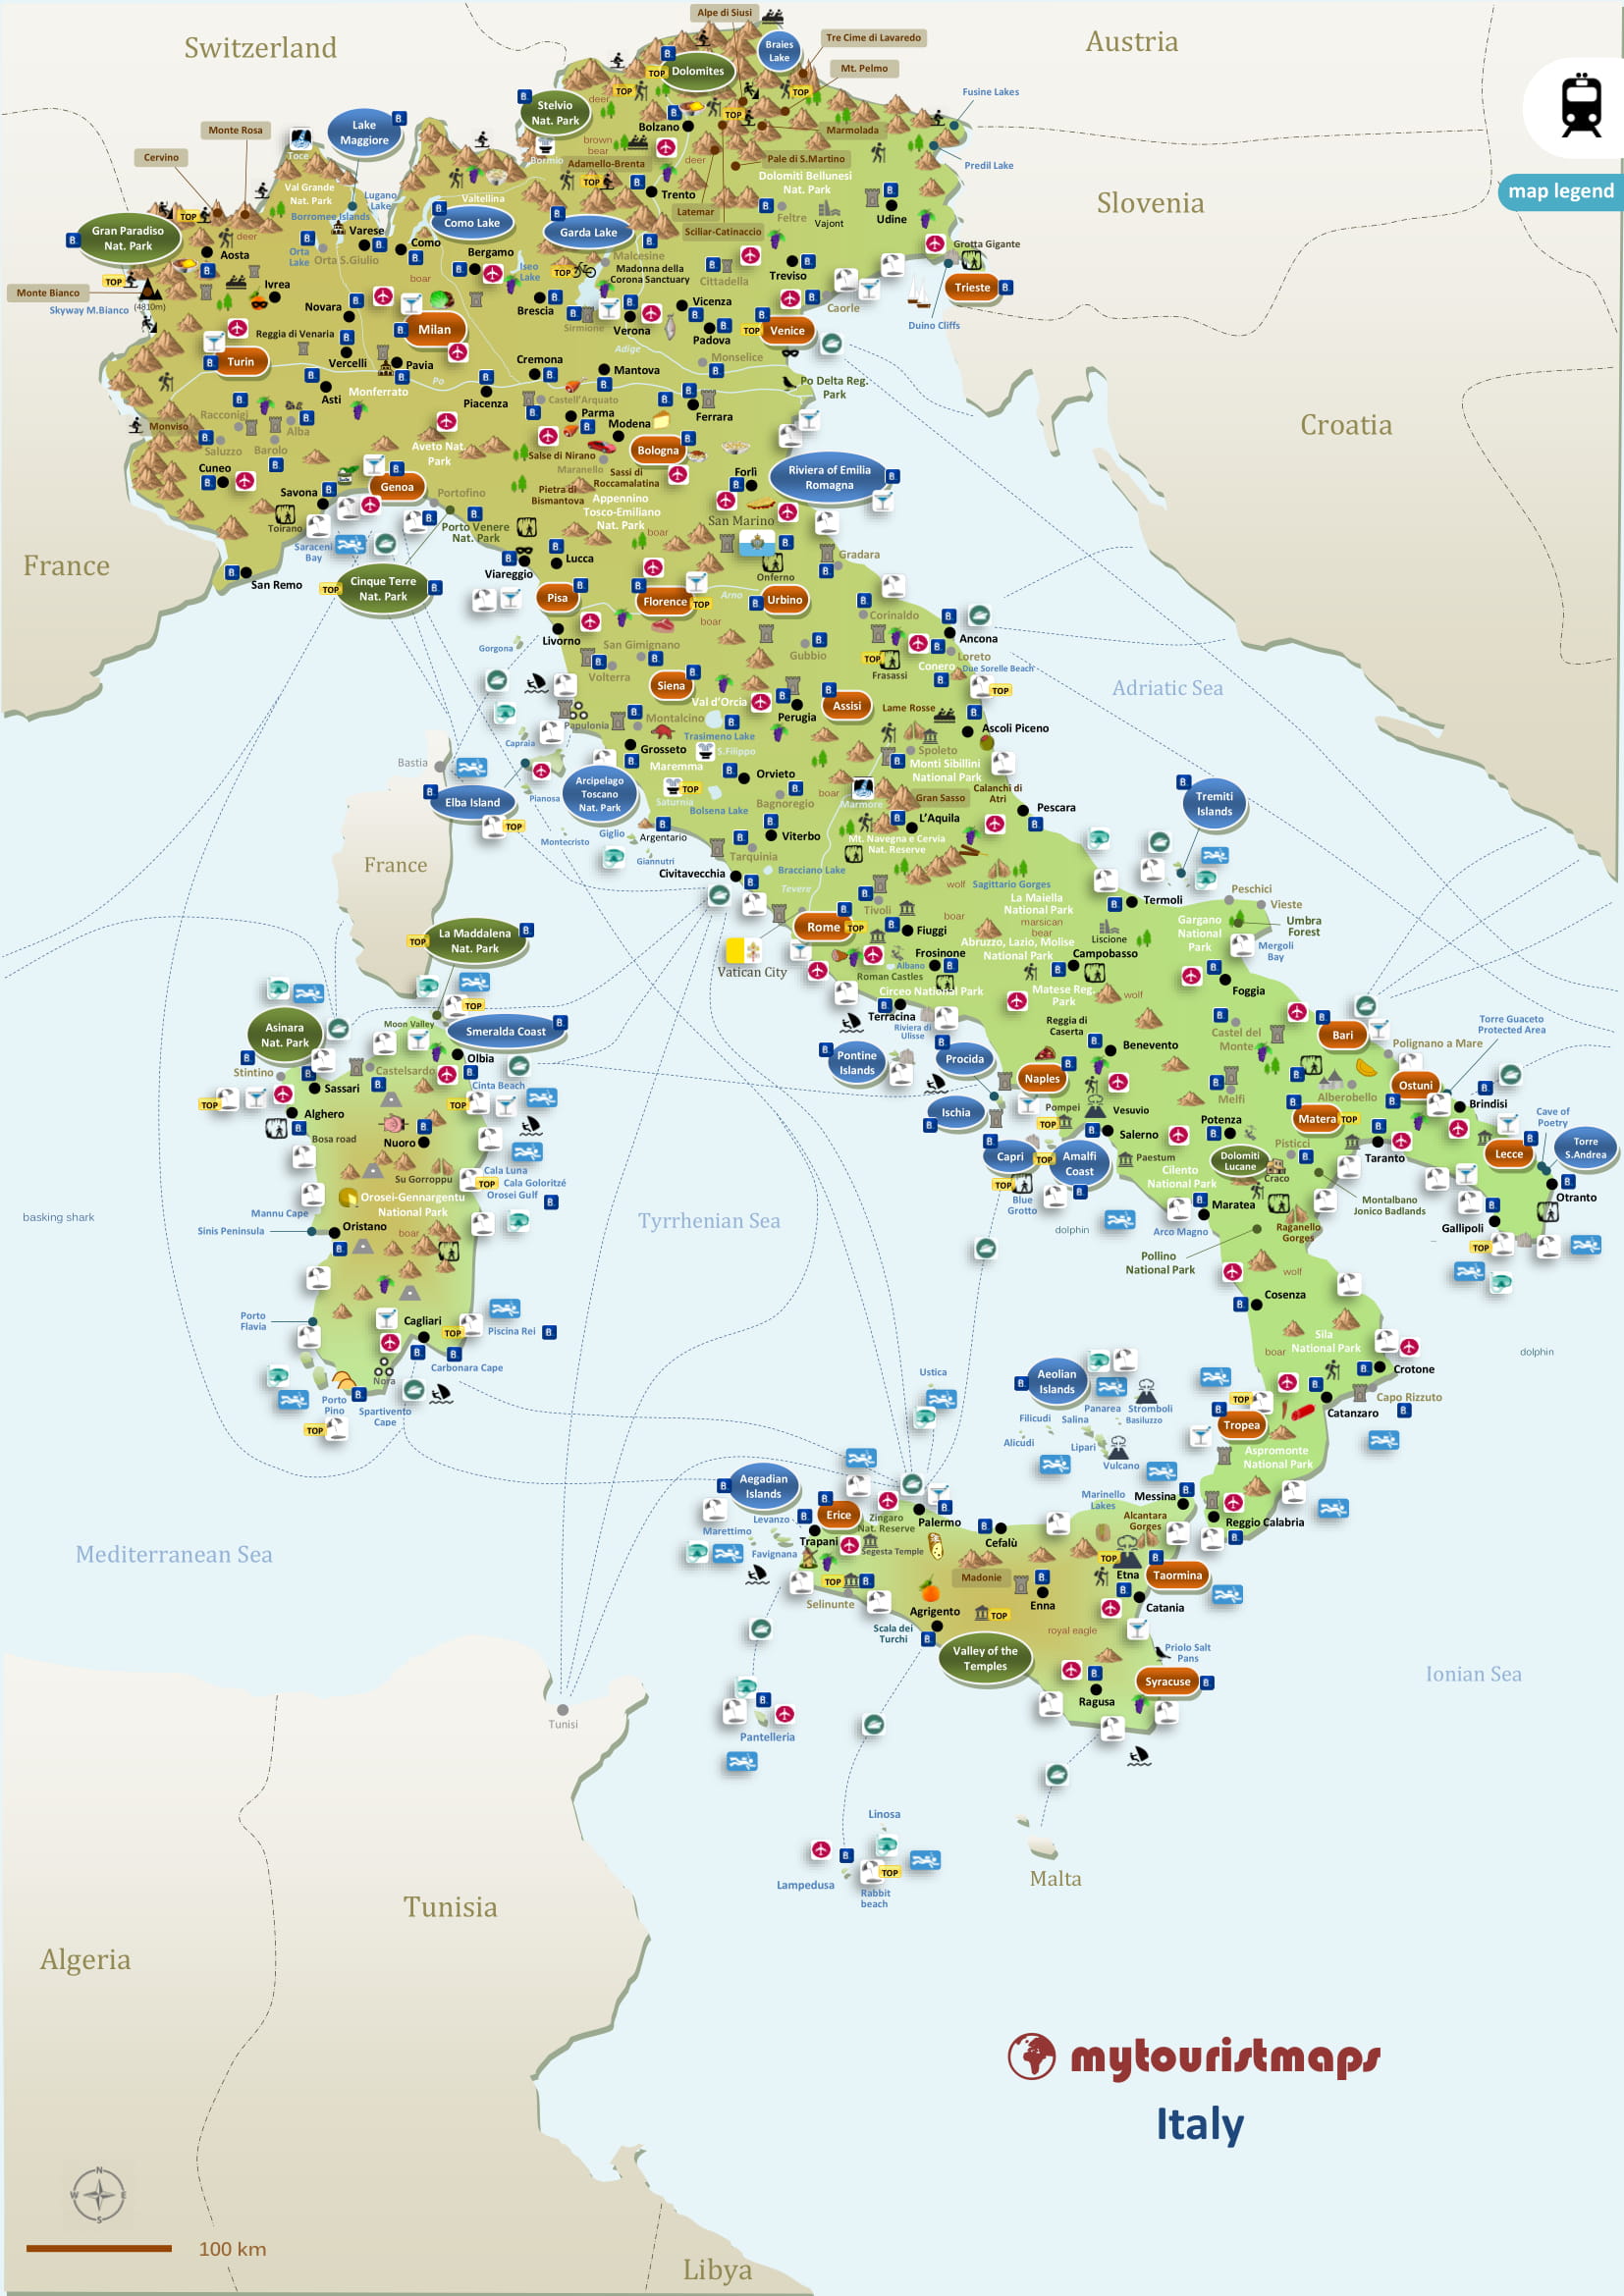 tourism guide italy